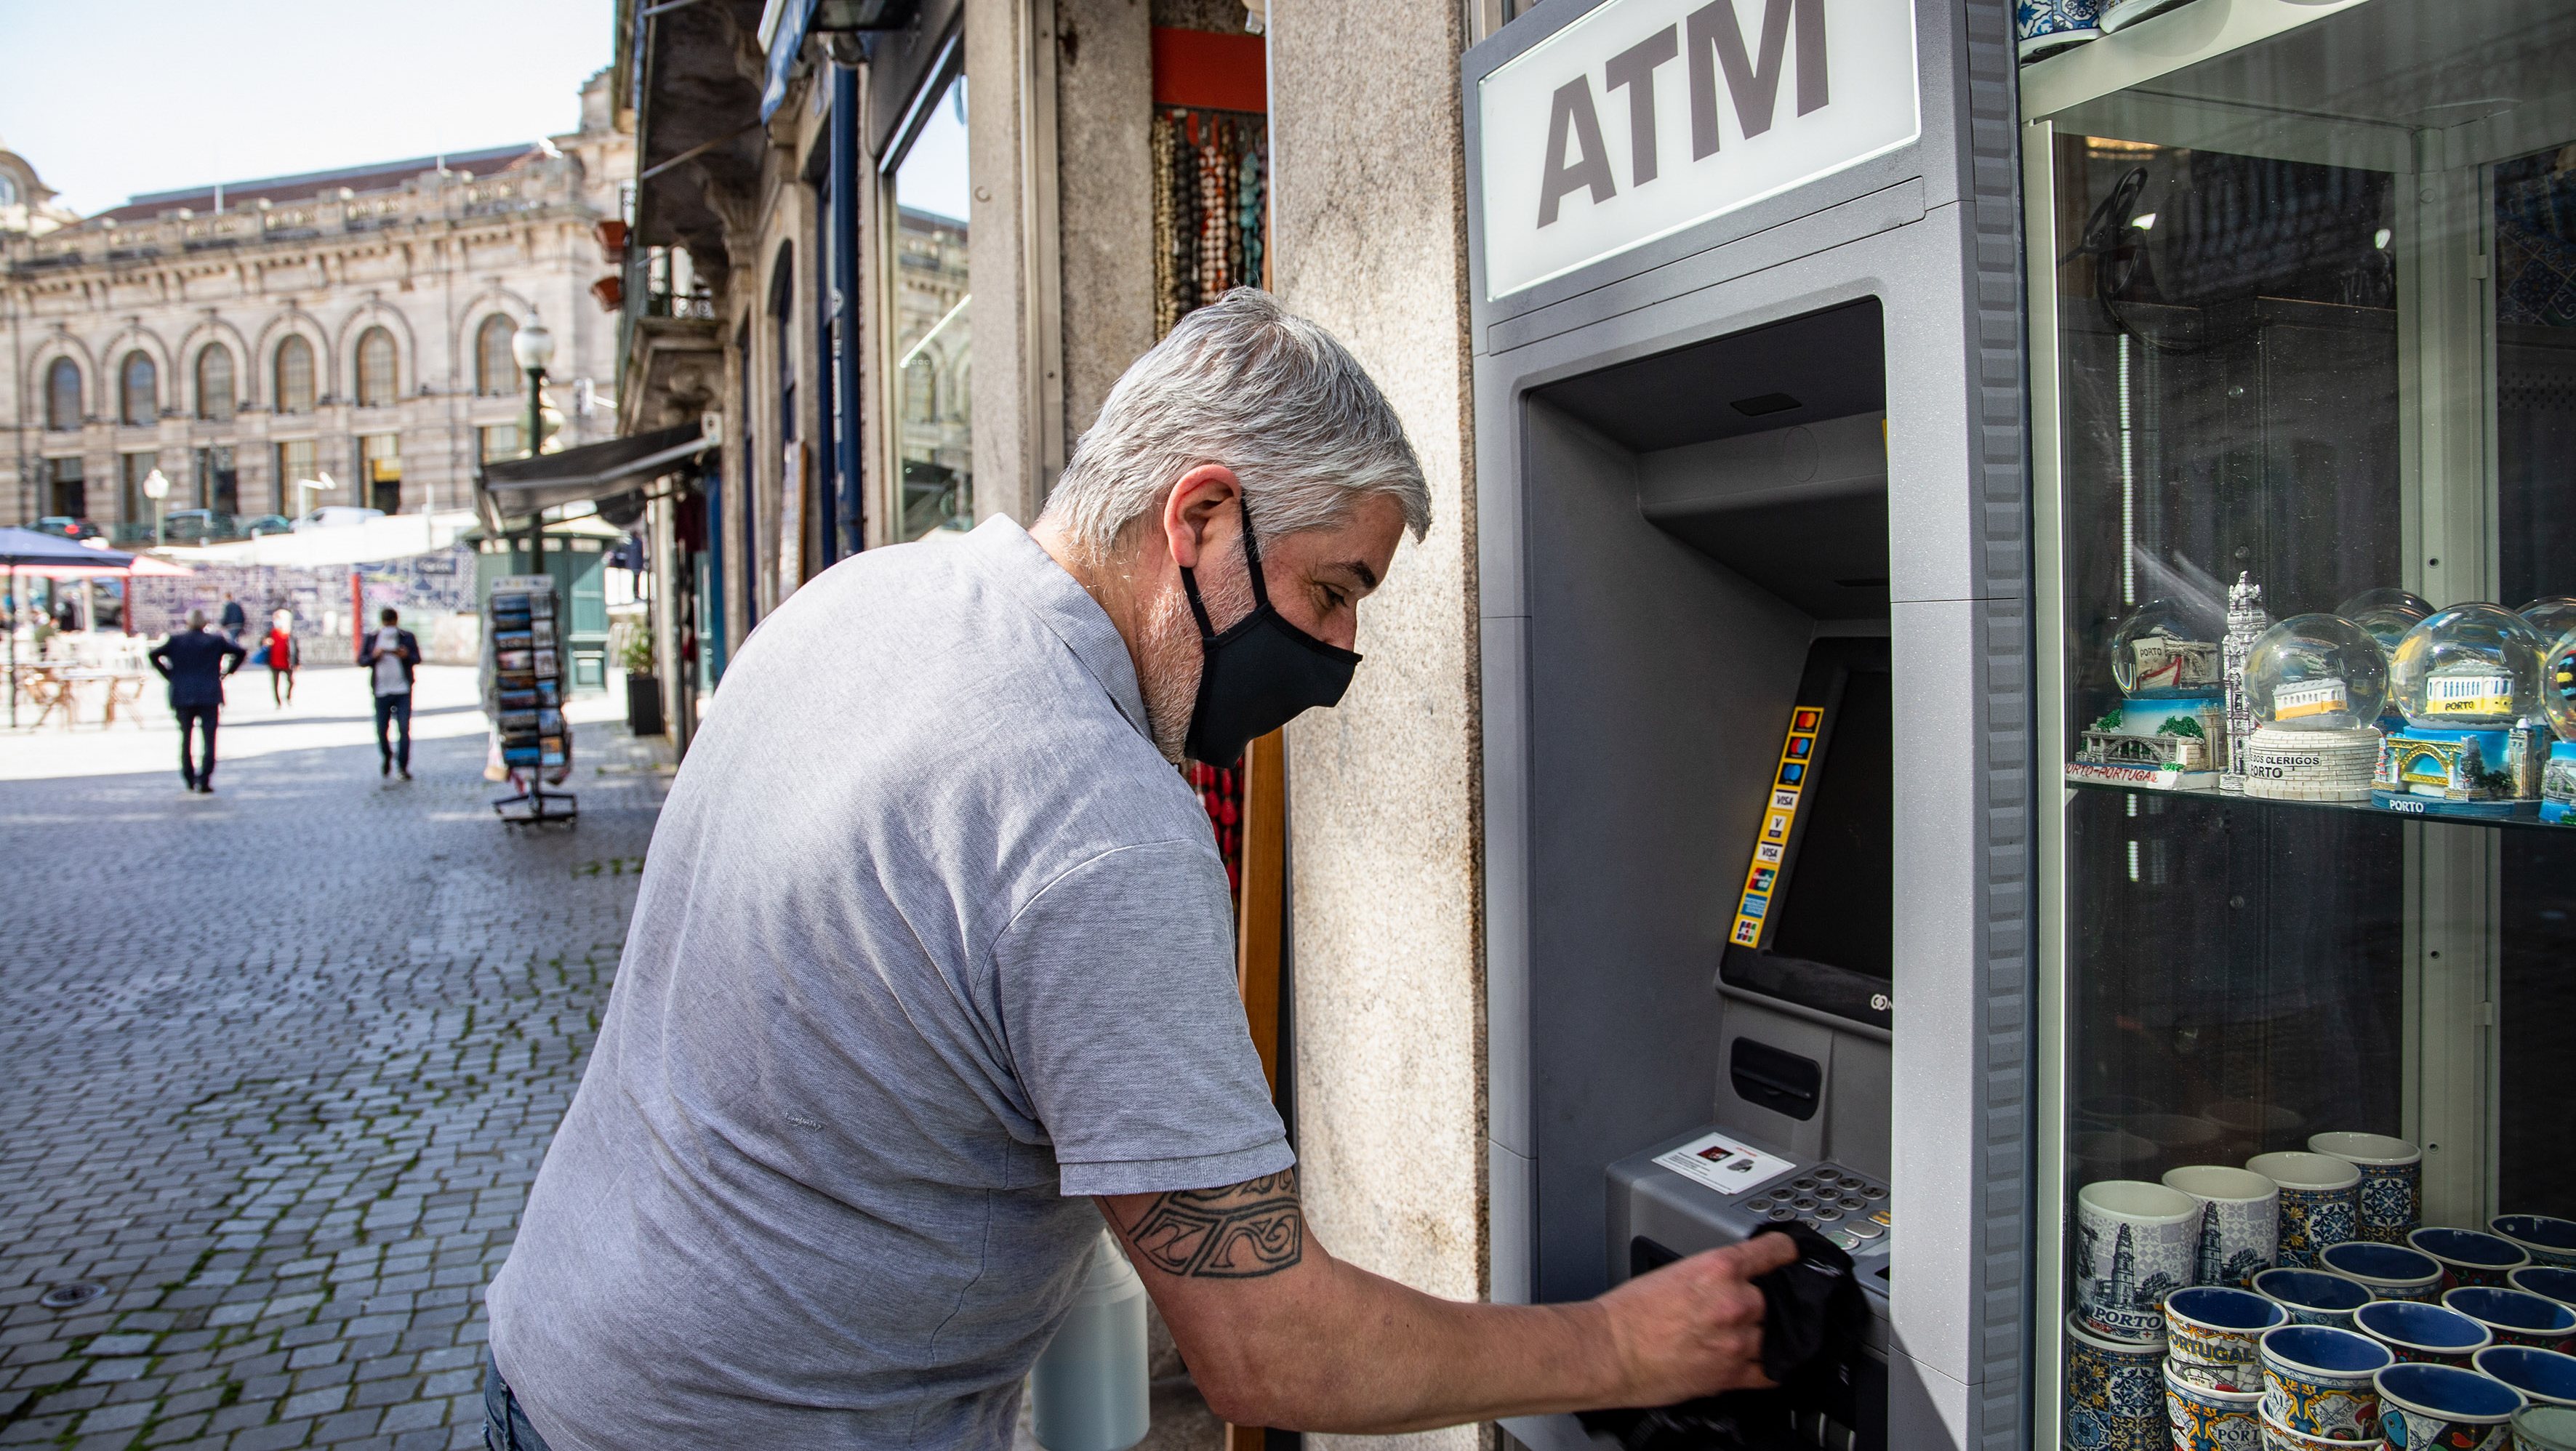 A man seen disinfecting an ATM machine, due to the covid-19